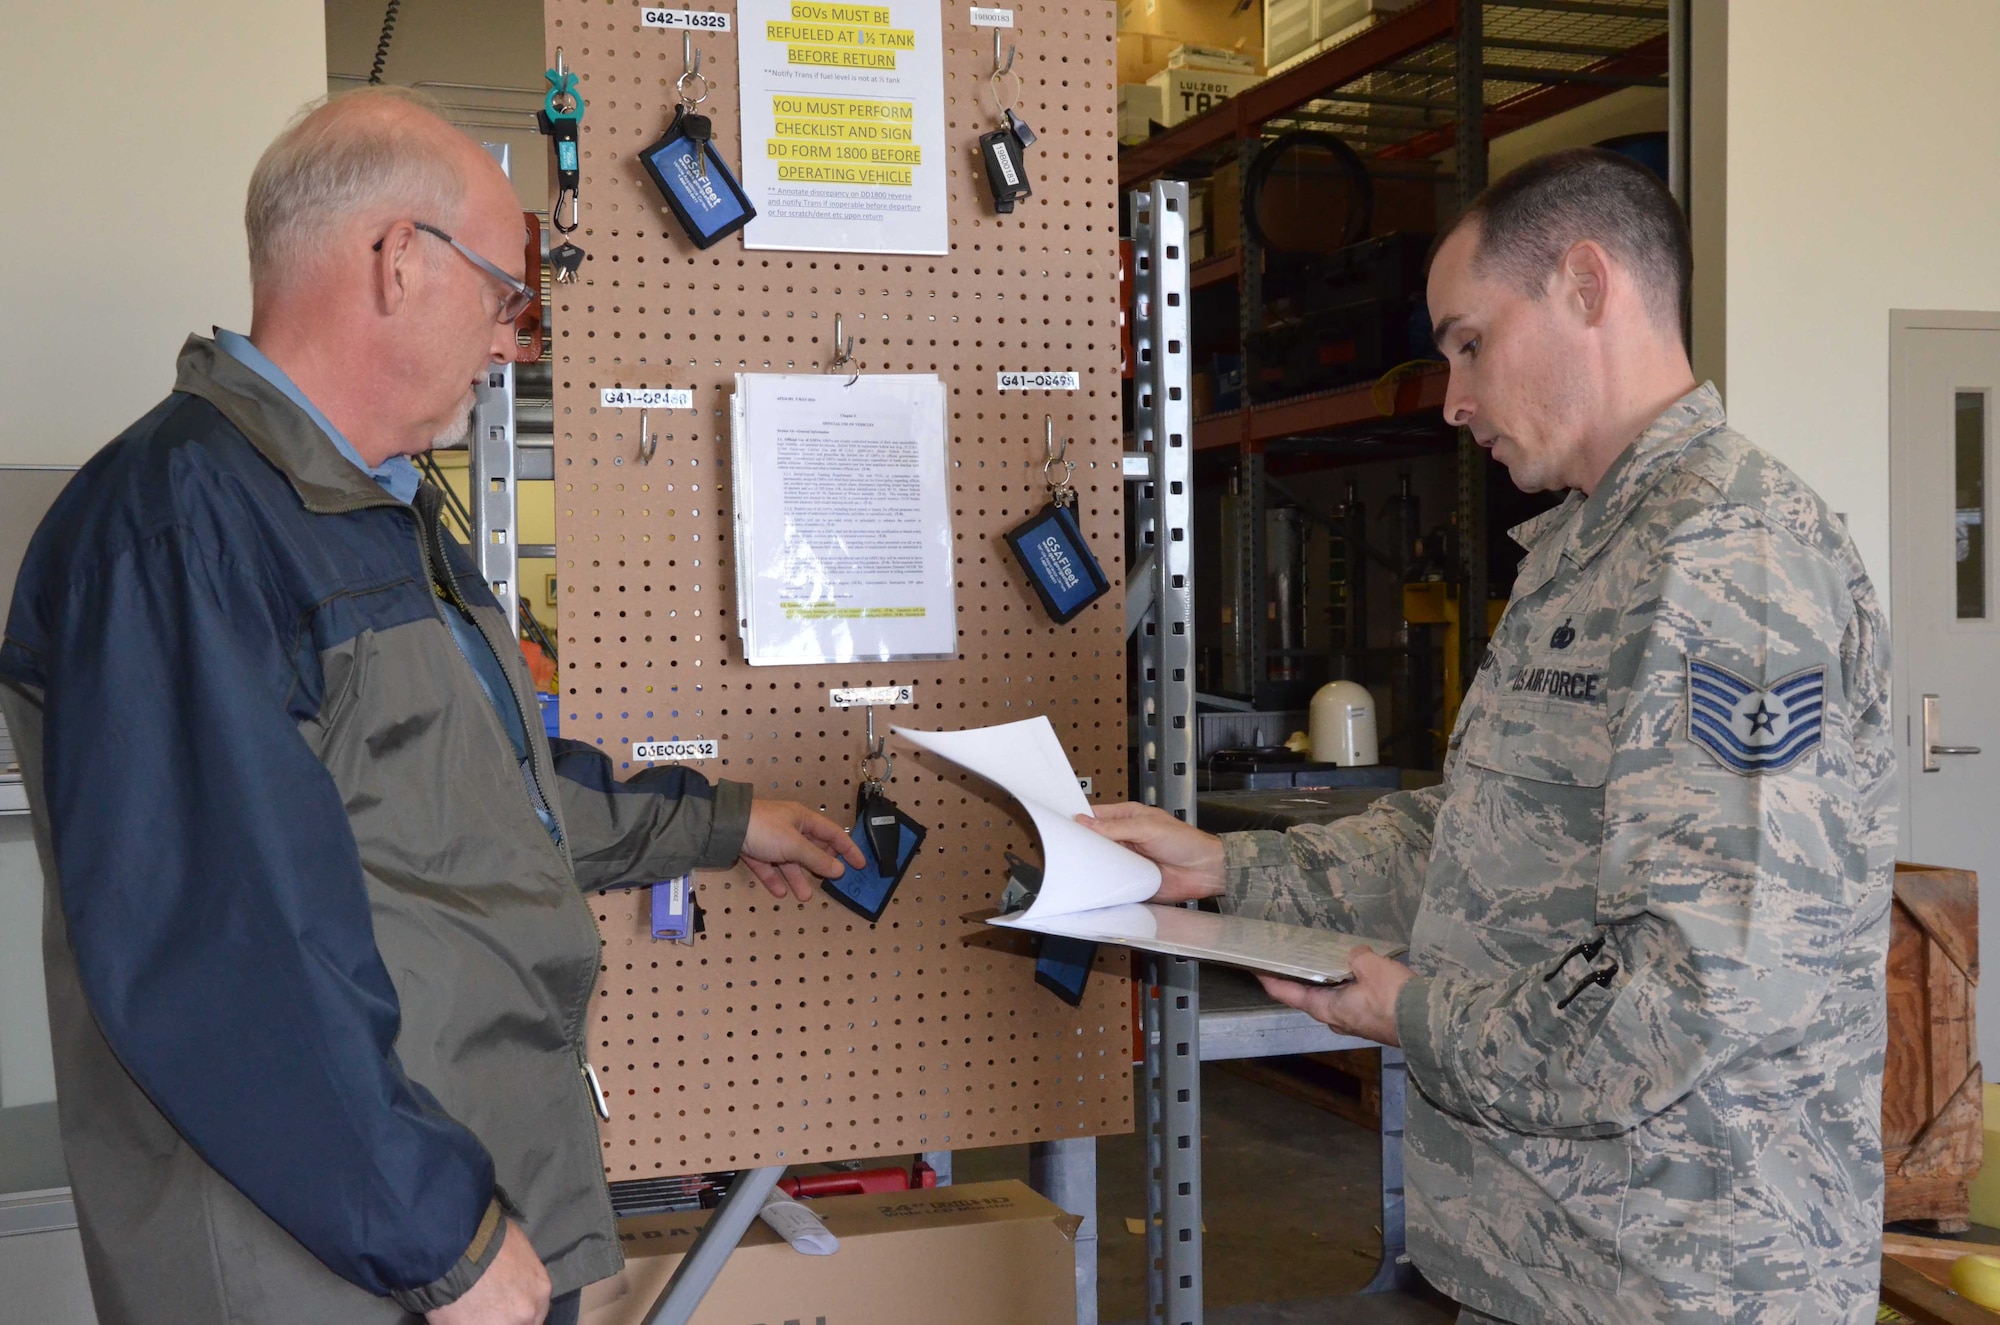 Tech. Sgt. Mark Melchionda (right), 709th Support Squadron section chief of transportation, discusses vehicle dispatch operations with his boss, James Battenfelder, 709th SPTS transportation manager.  The squadron recently streamlined its transportation and shipping operations to more efficiently manage its fleet of vehicles and cargo shipments.